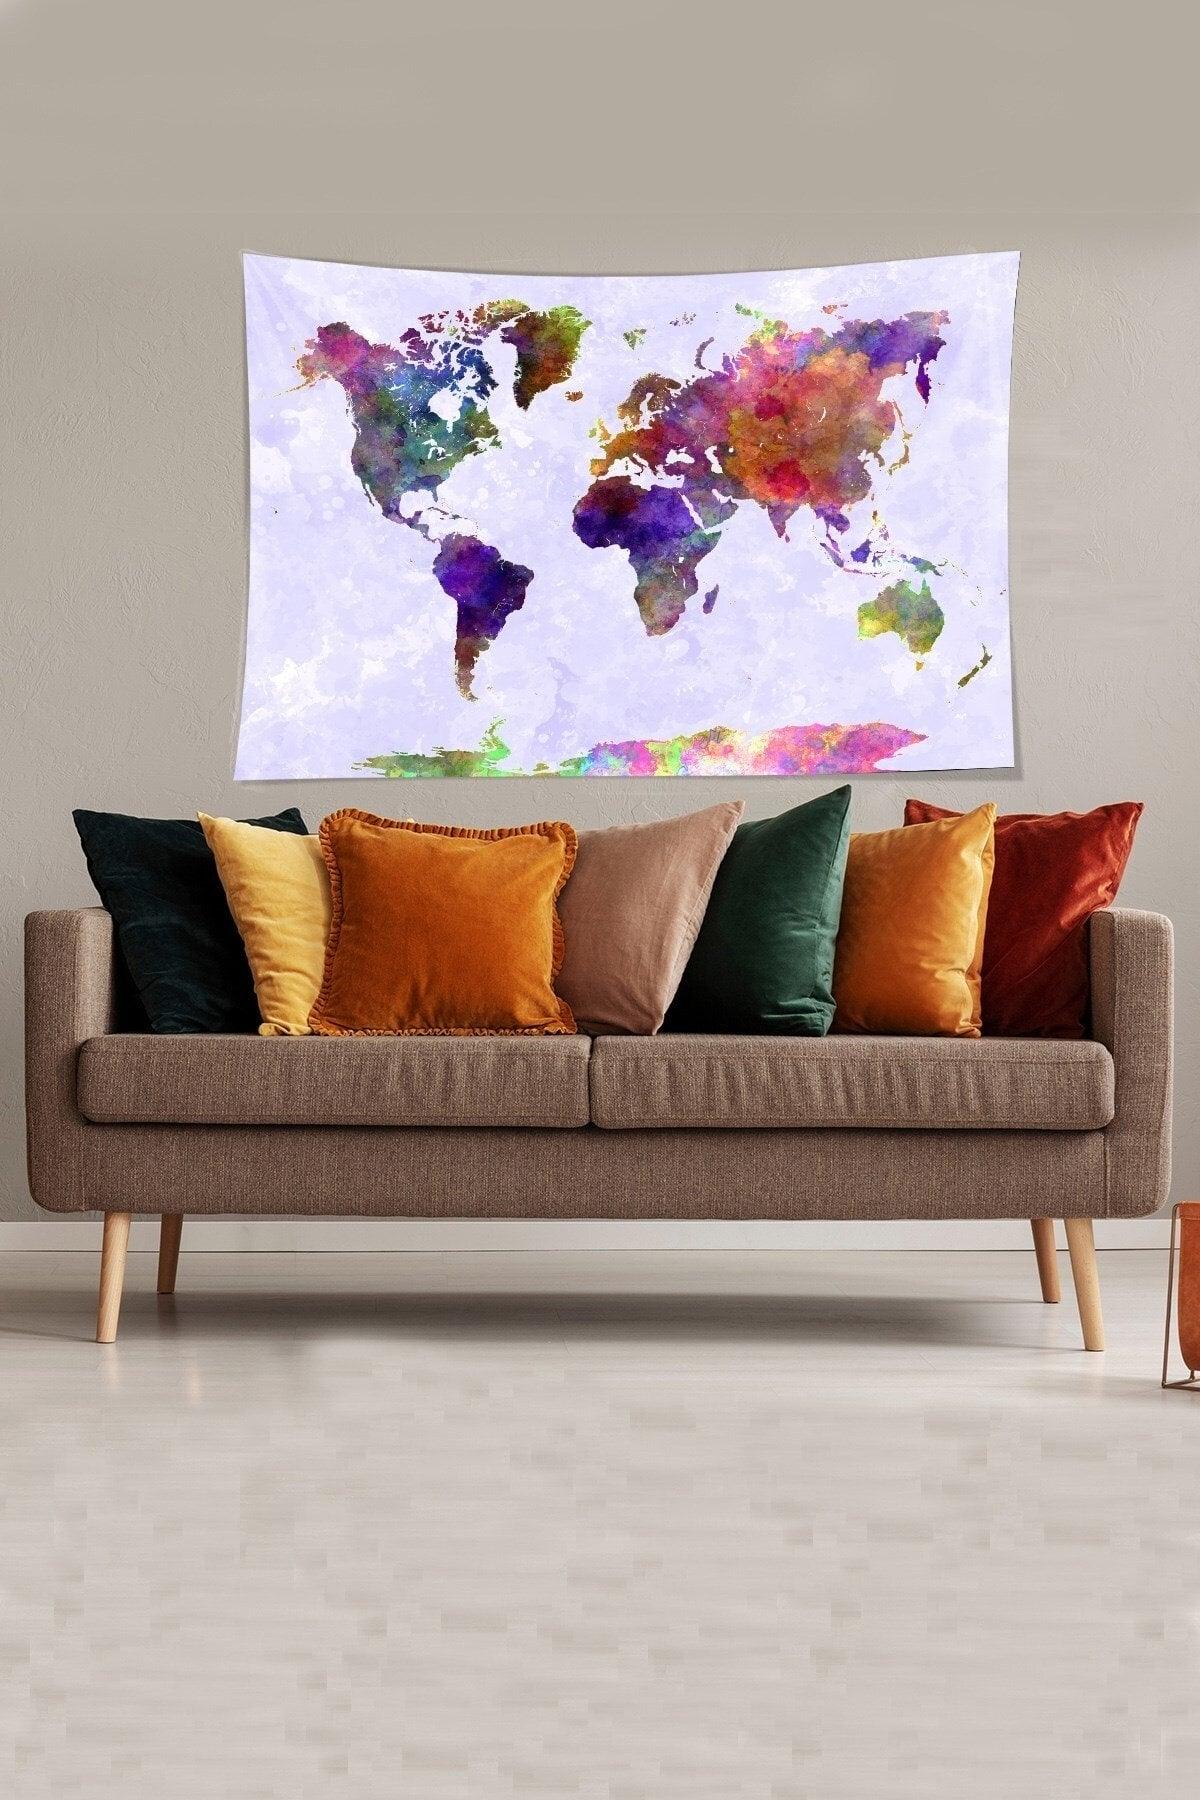 Lilac-blue World Map Patterned Stain Resistant Velvet Fabric Wall Covering Tapestry Tapestry - Swordslife